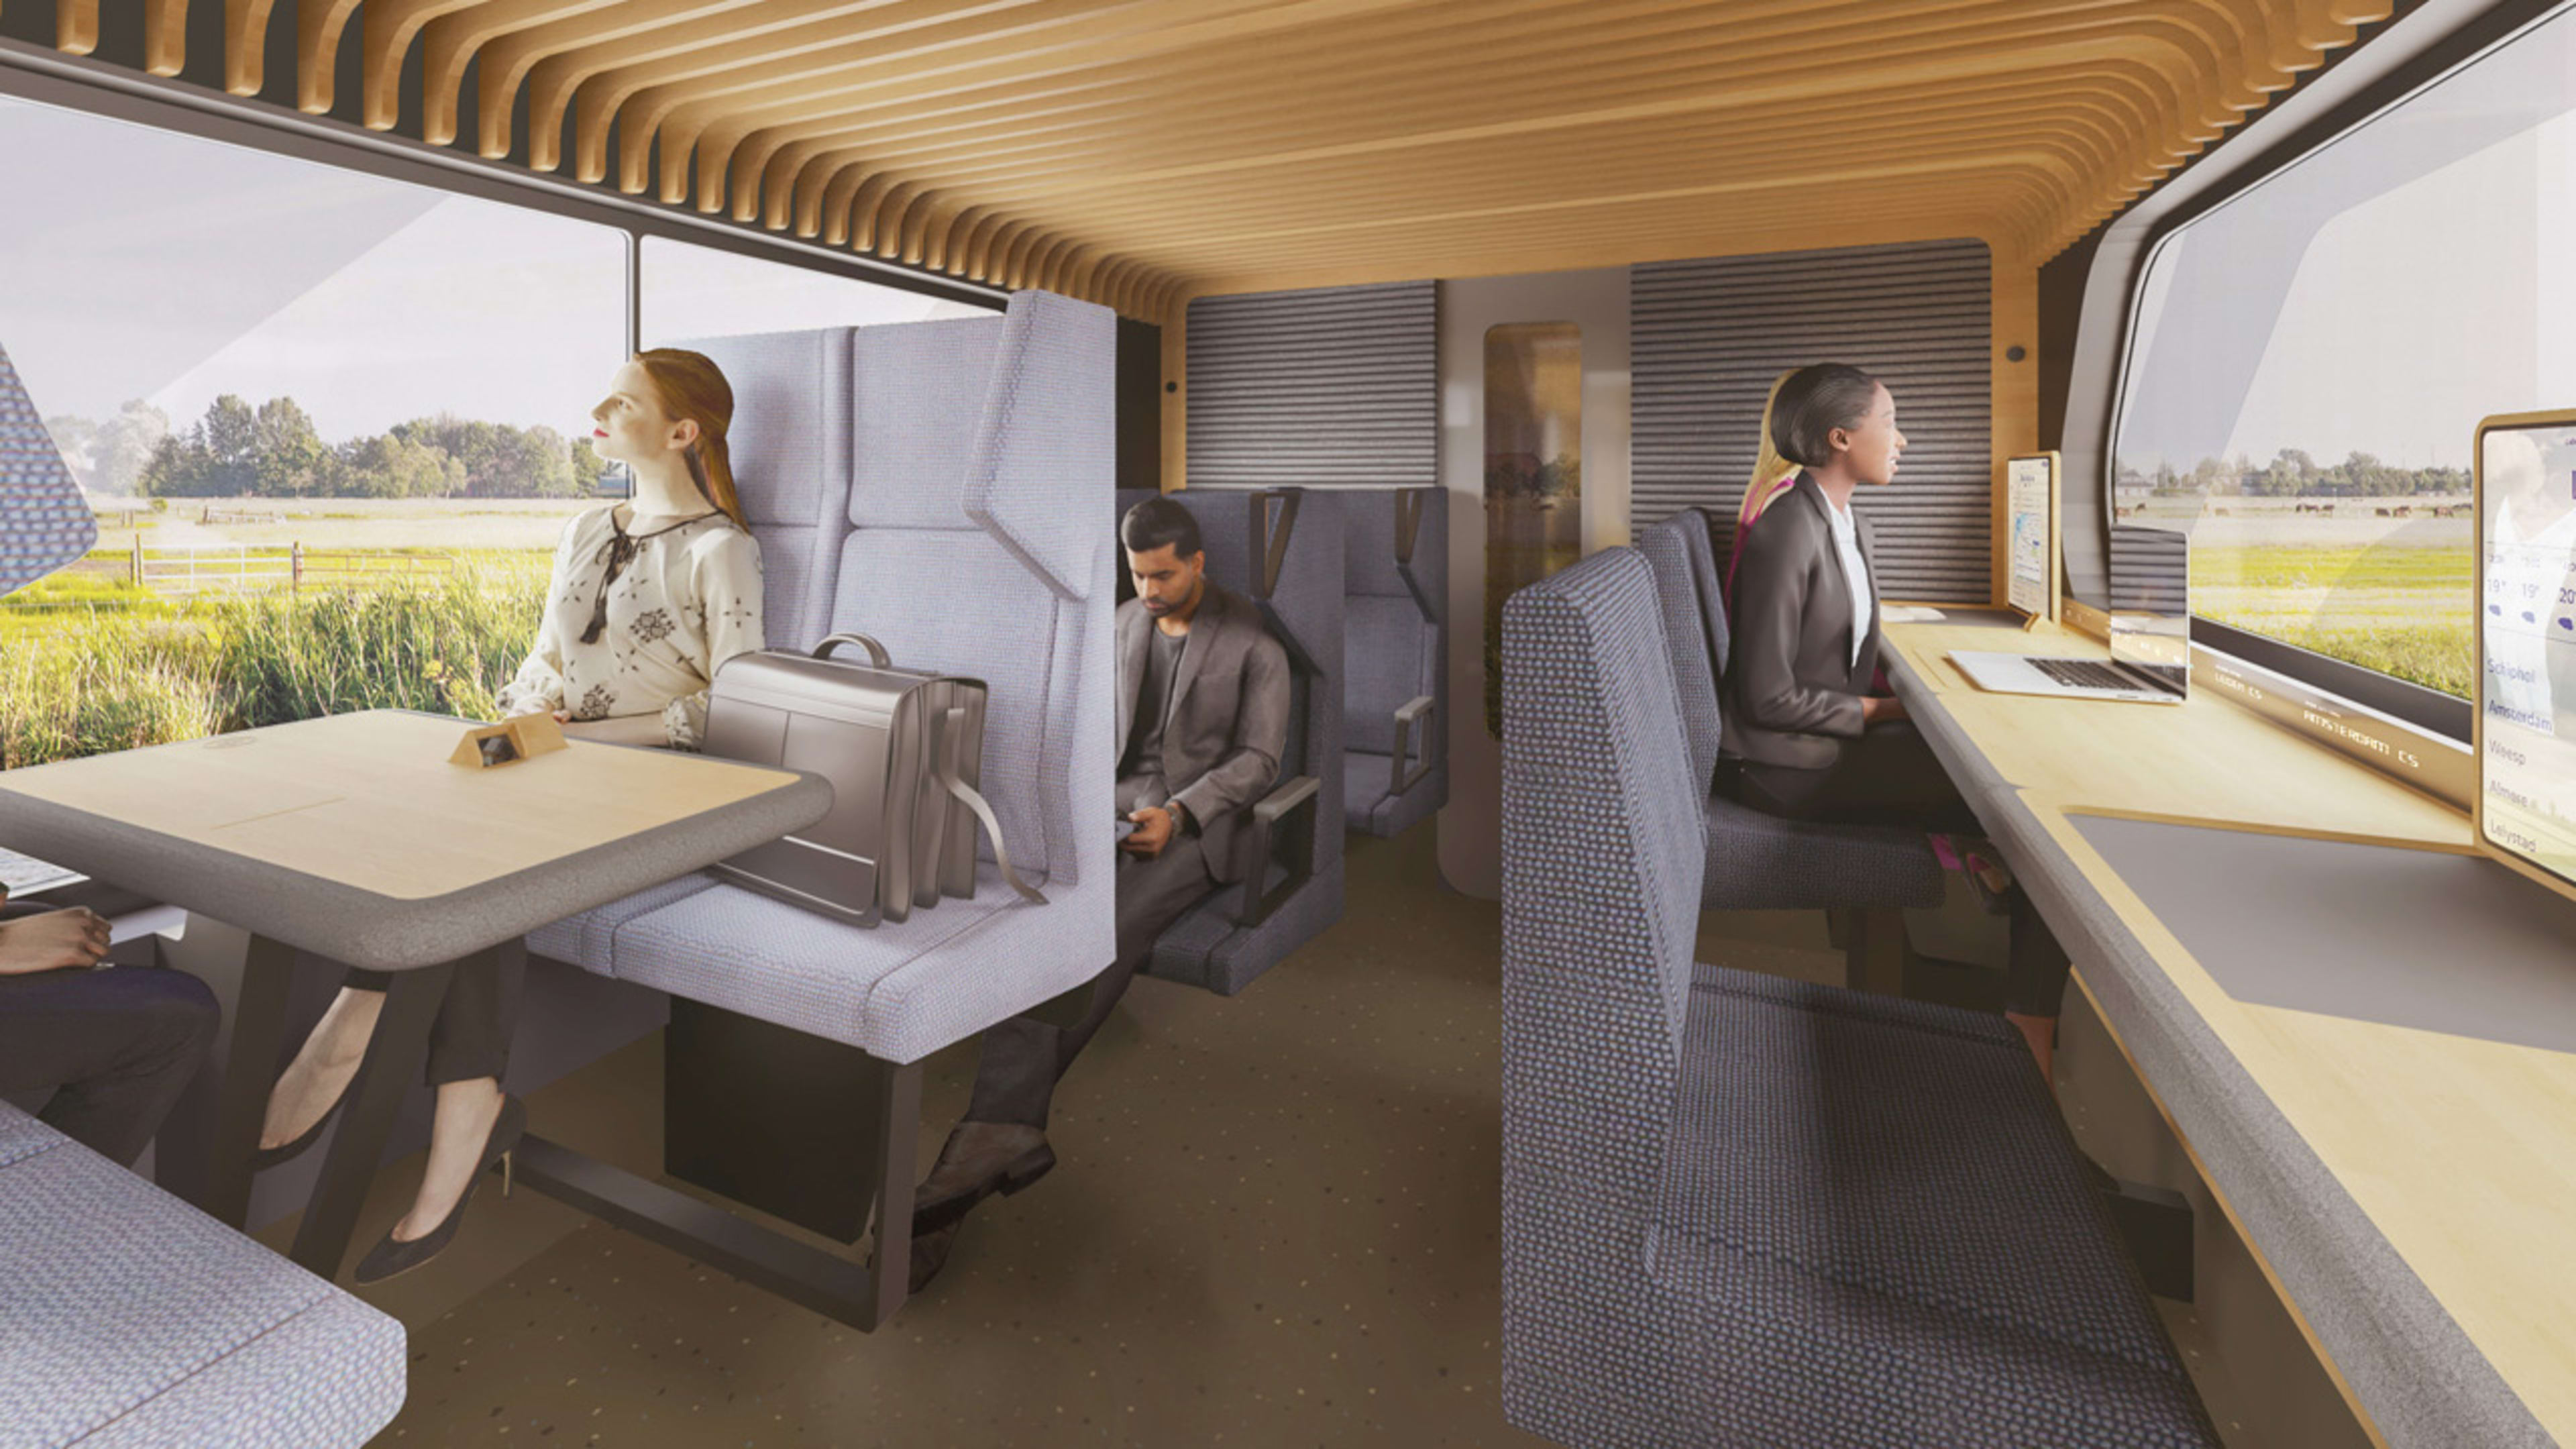 The Netherlands’ new train cars are nicer than your office